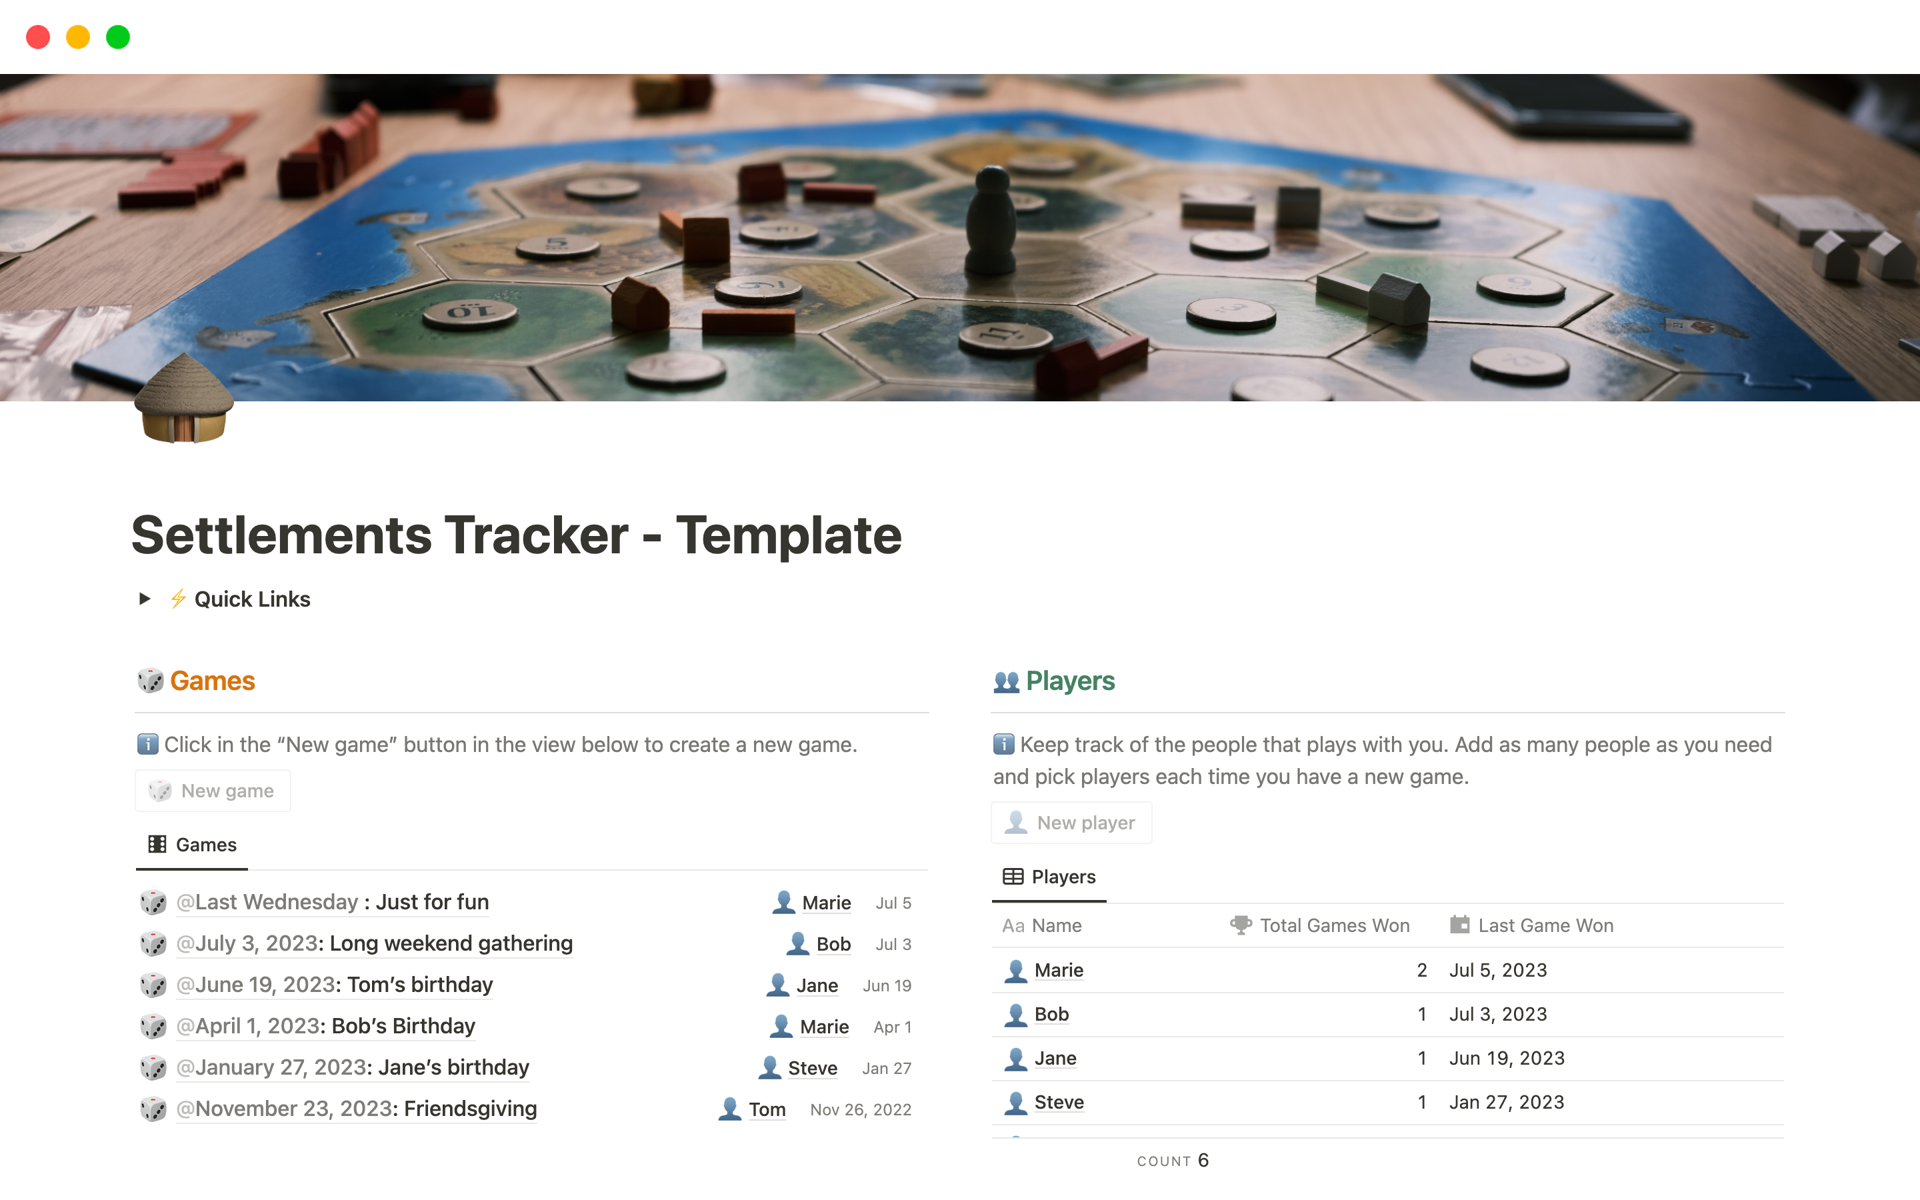 Keep track of your Catan gameplay with this Notion template designed for Catan enthusiasts like you. Keep track of your game sessions, players, and progress with ease using this mobile-friendly tool.